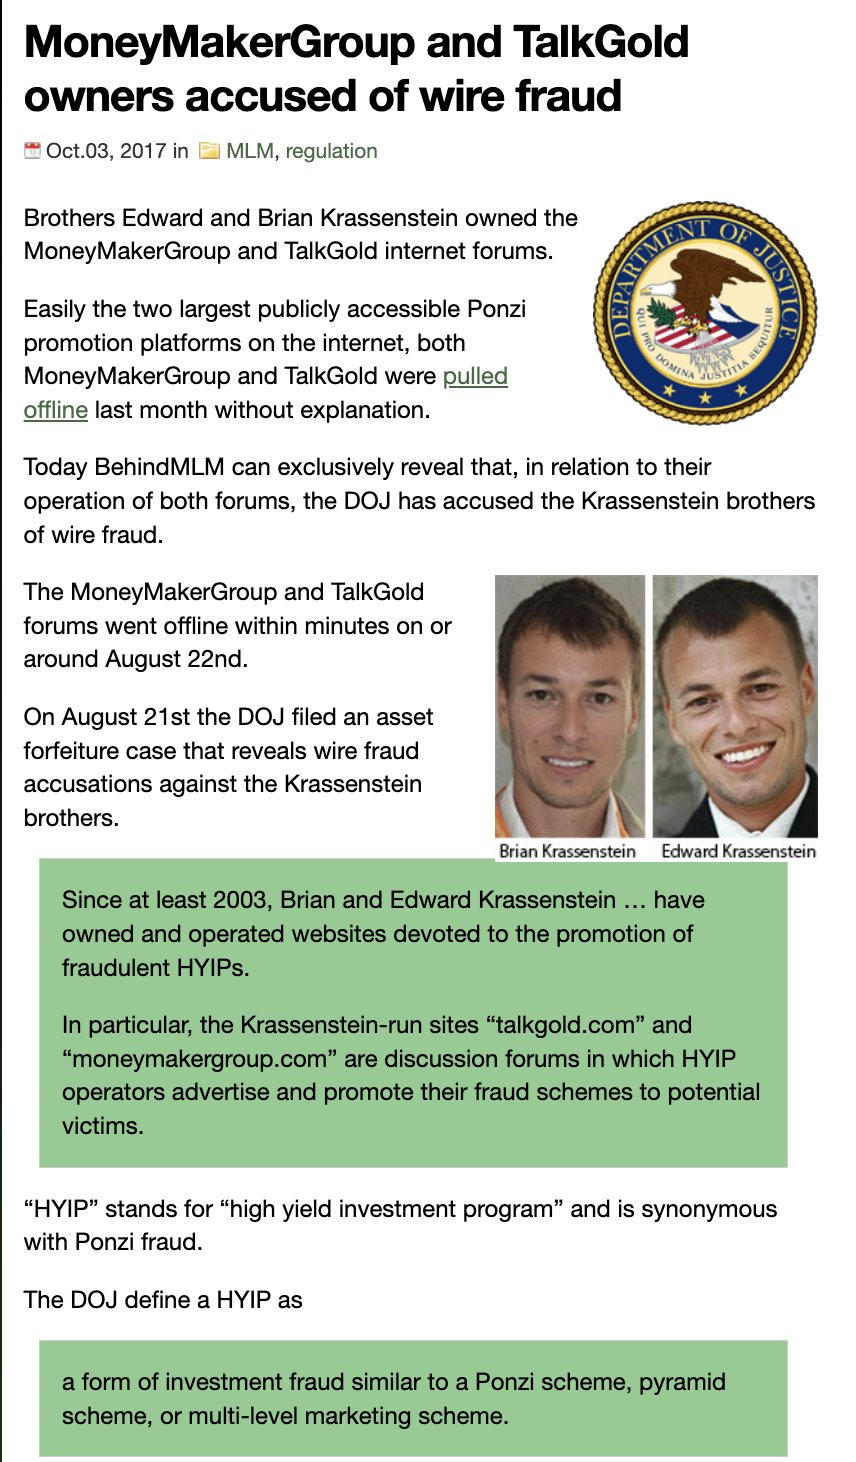 https://behindmlm.com/mlm/moneymakergroup-and-talkgold-owners-accused-of-wire-fraud/